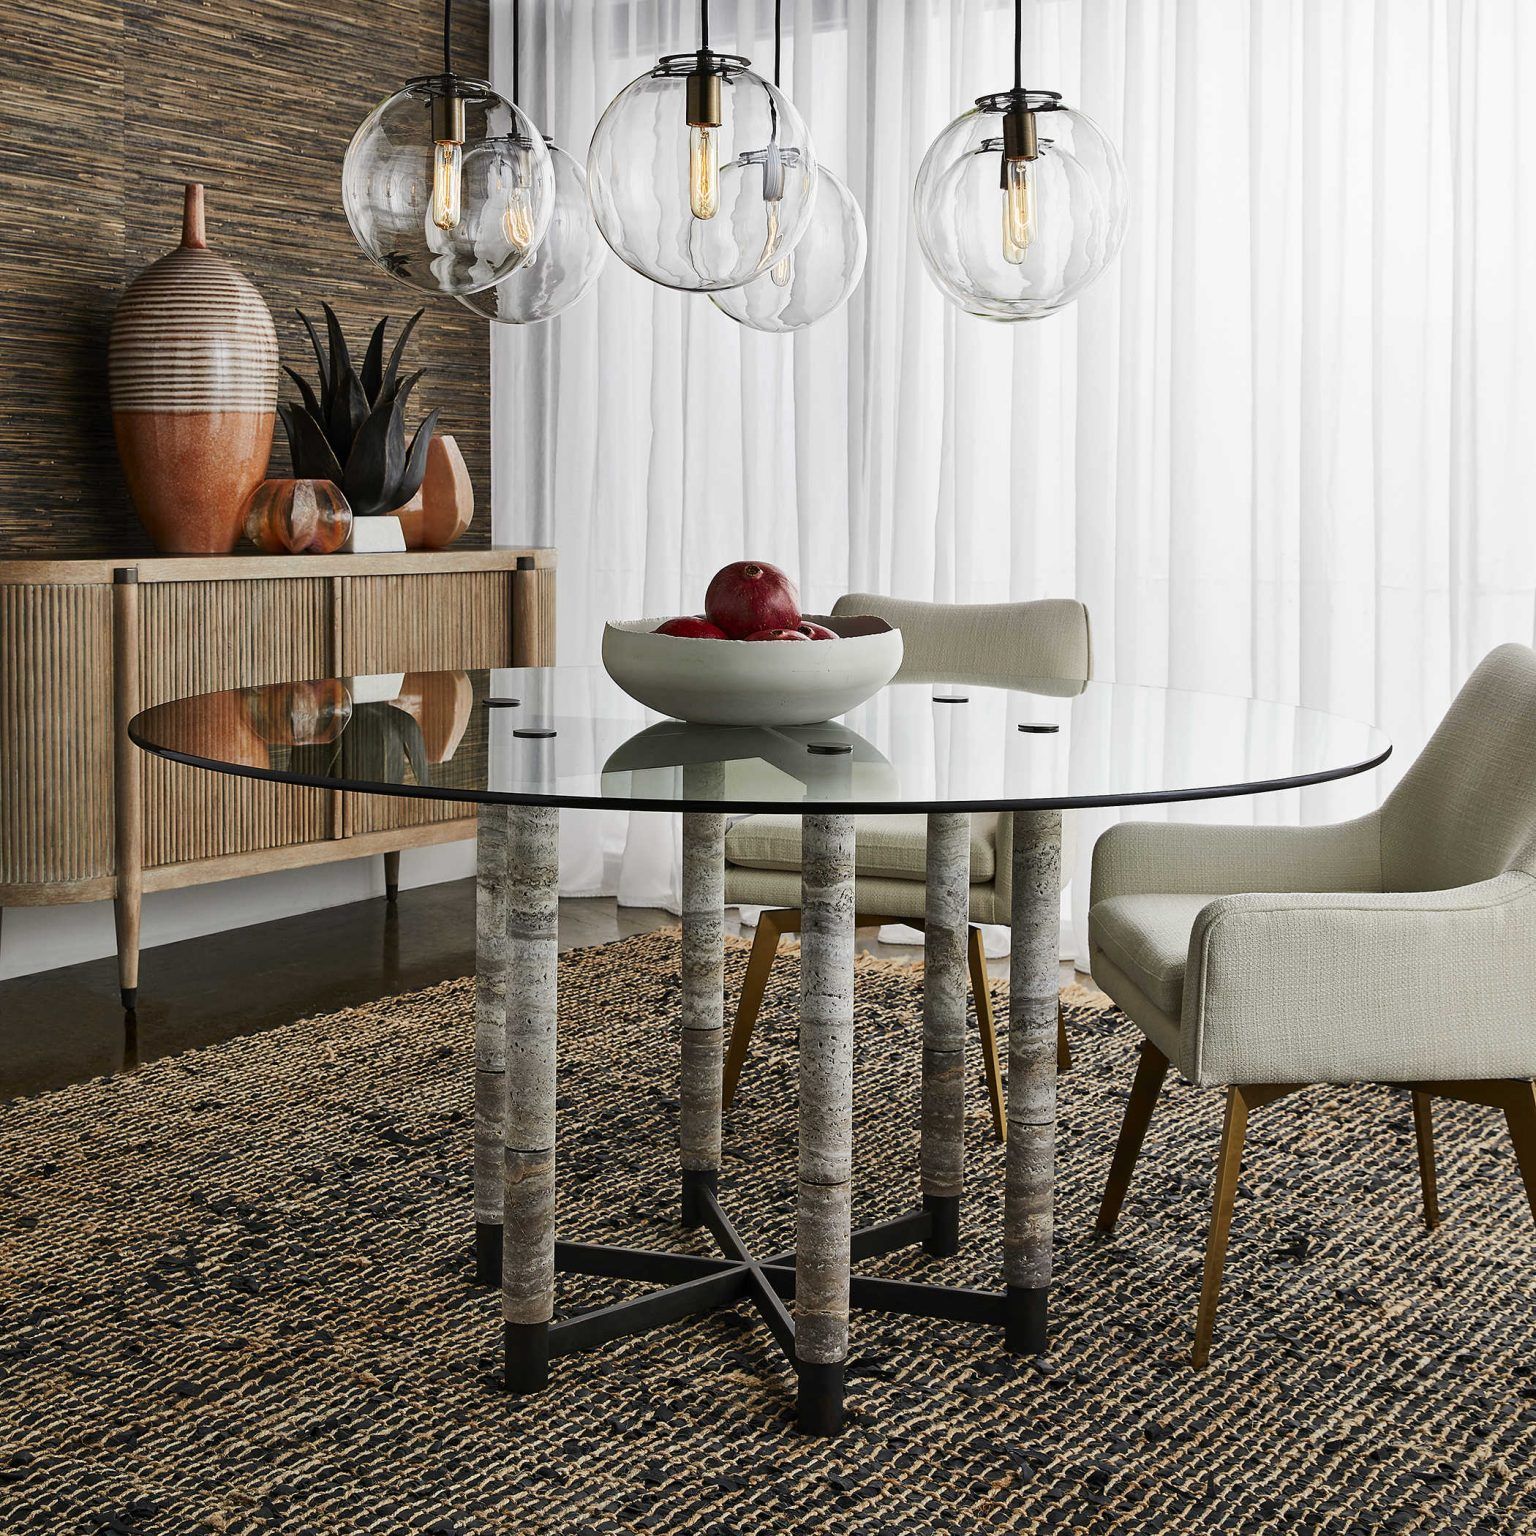 Mi-century modern dining table is sophisticated and retro